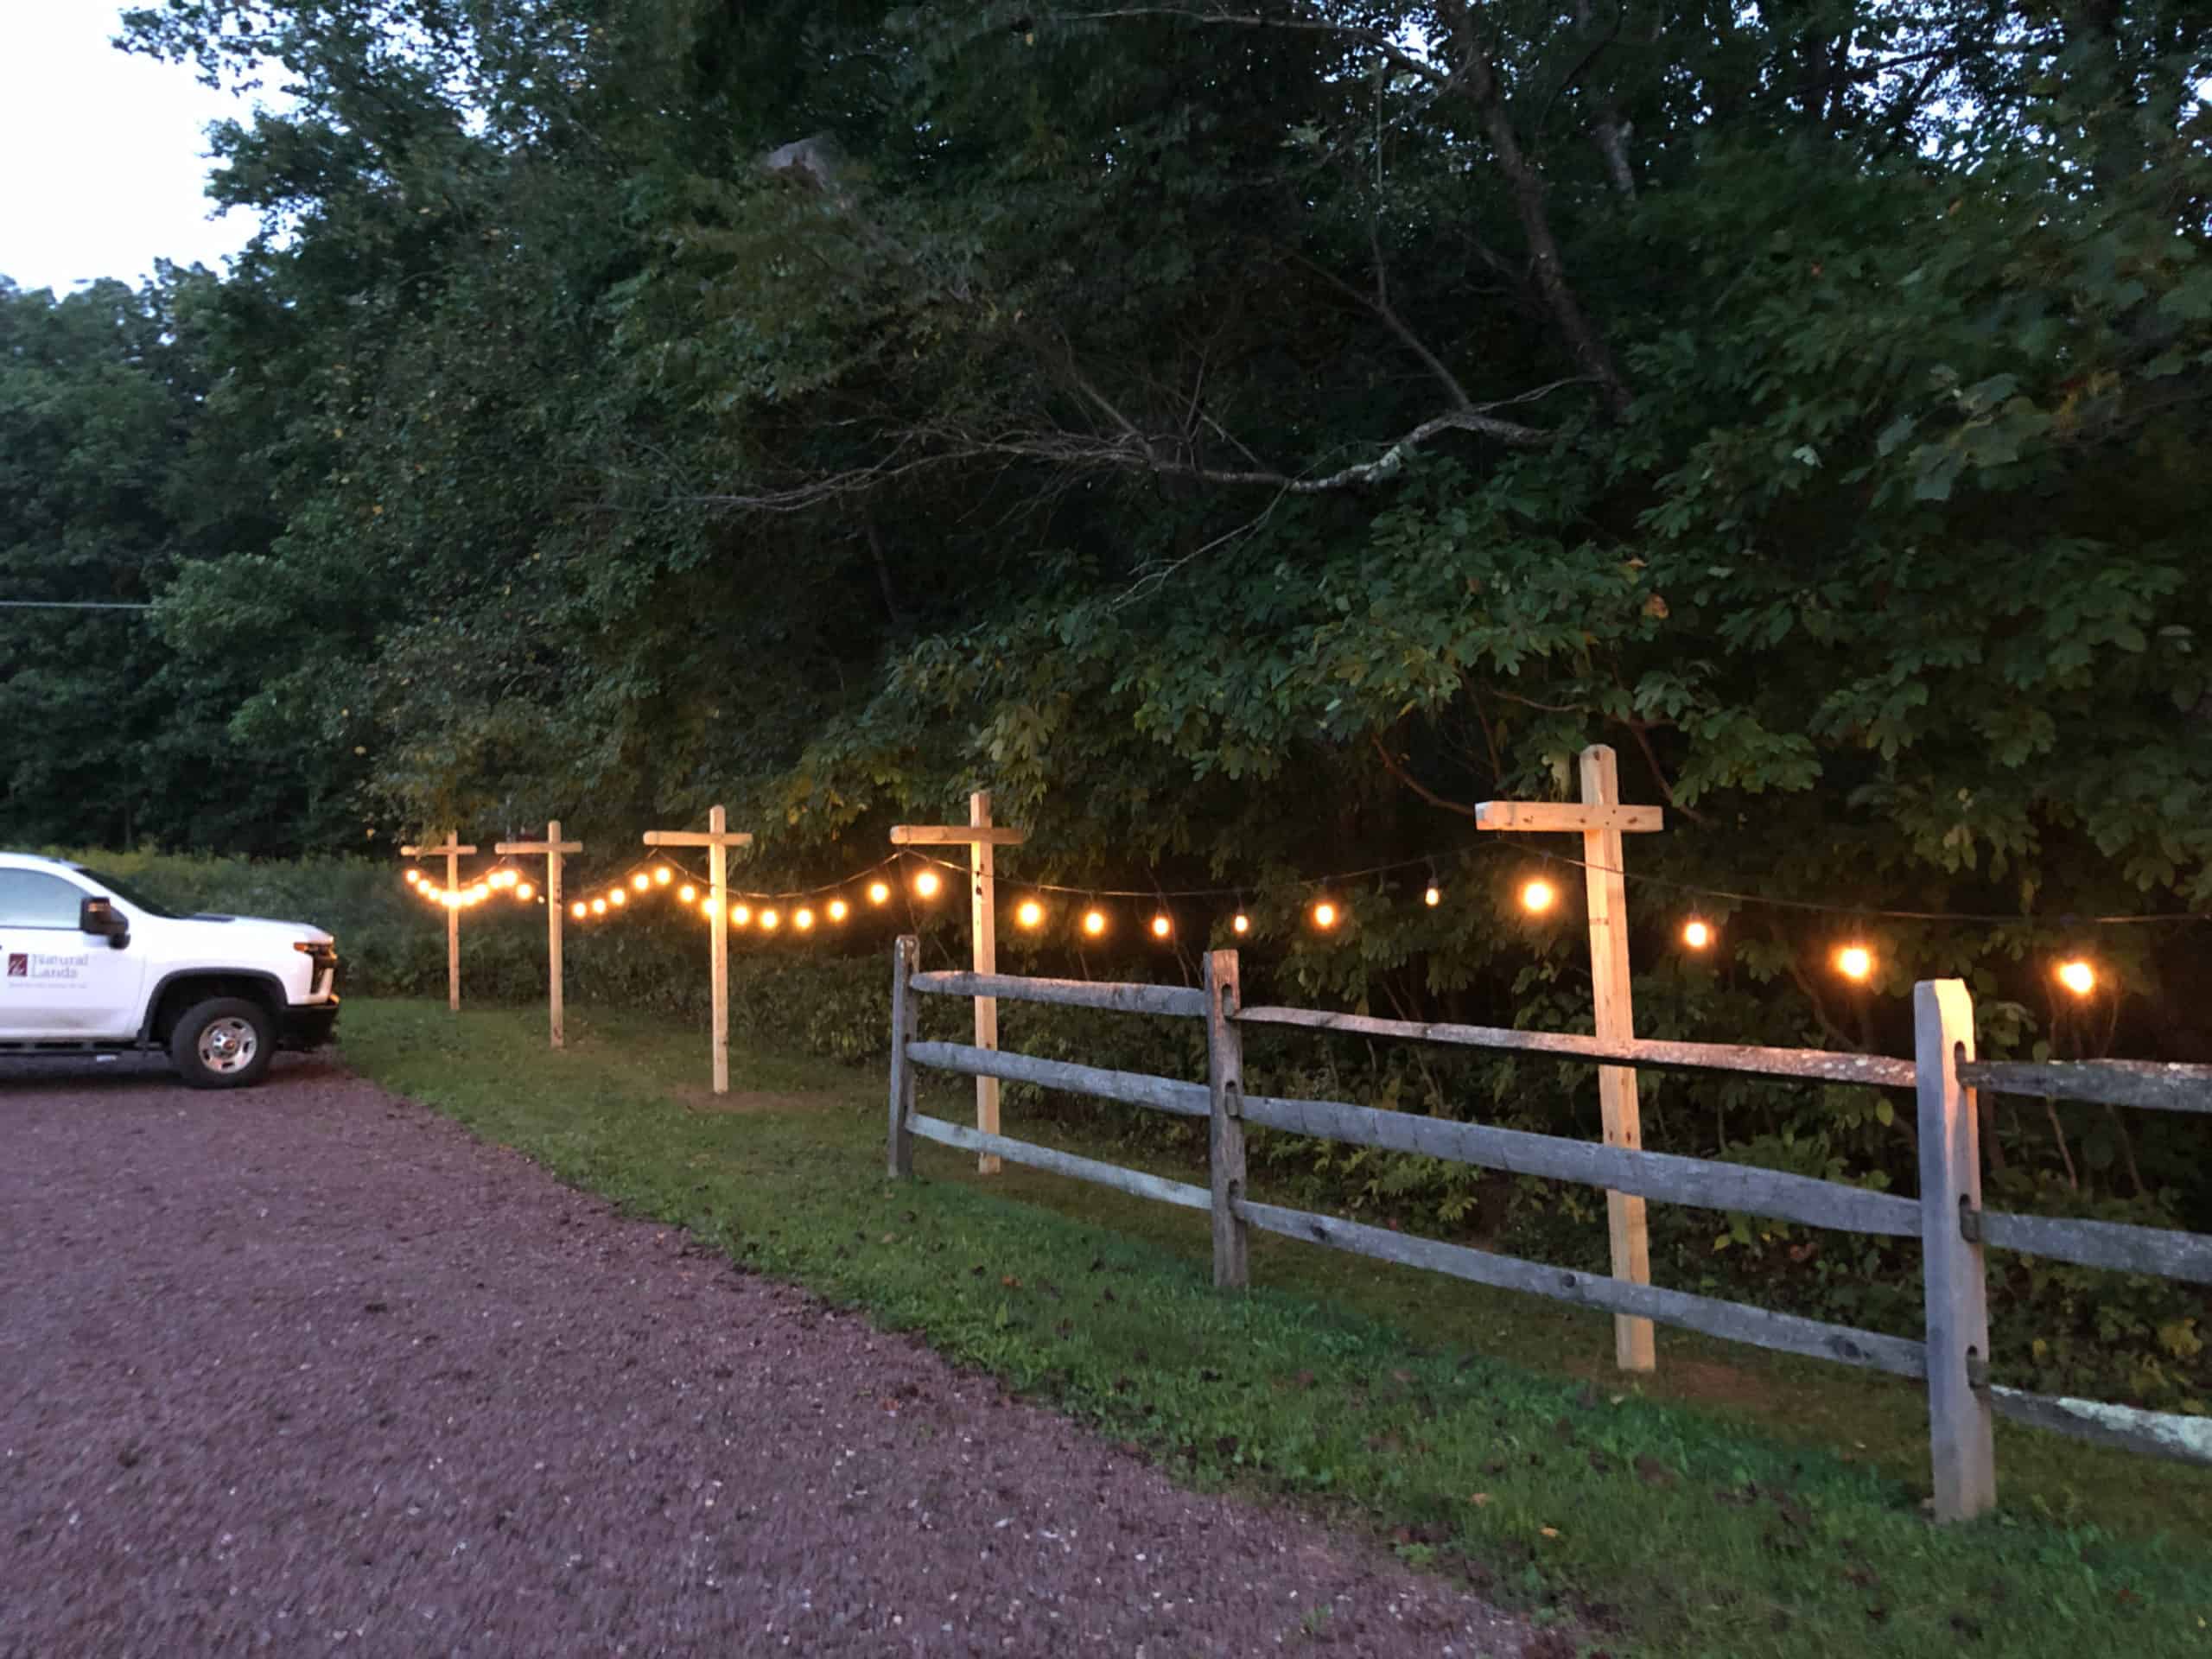 A string of lights on new posts illuminates the parking lot at Crow's Nest Preserve